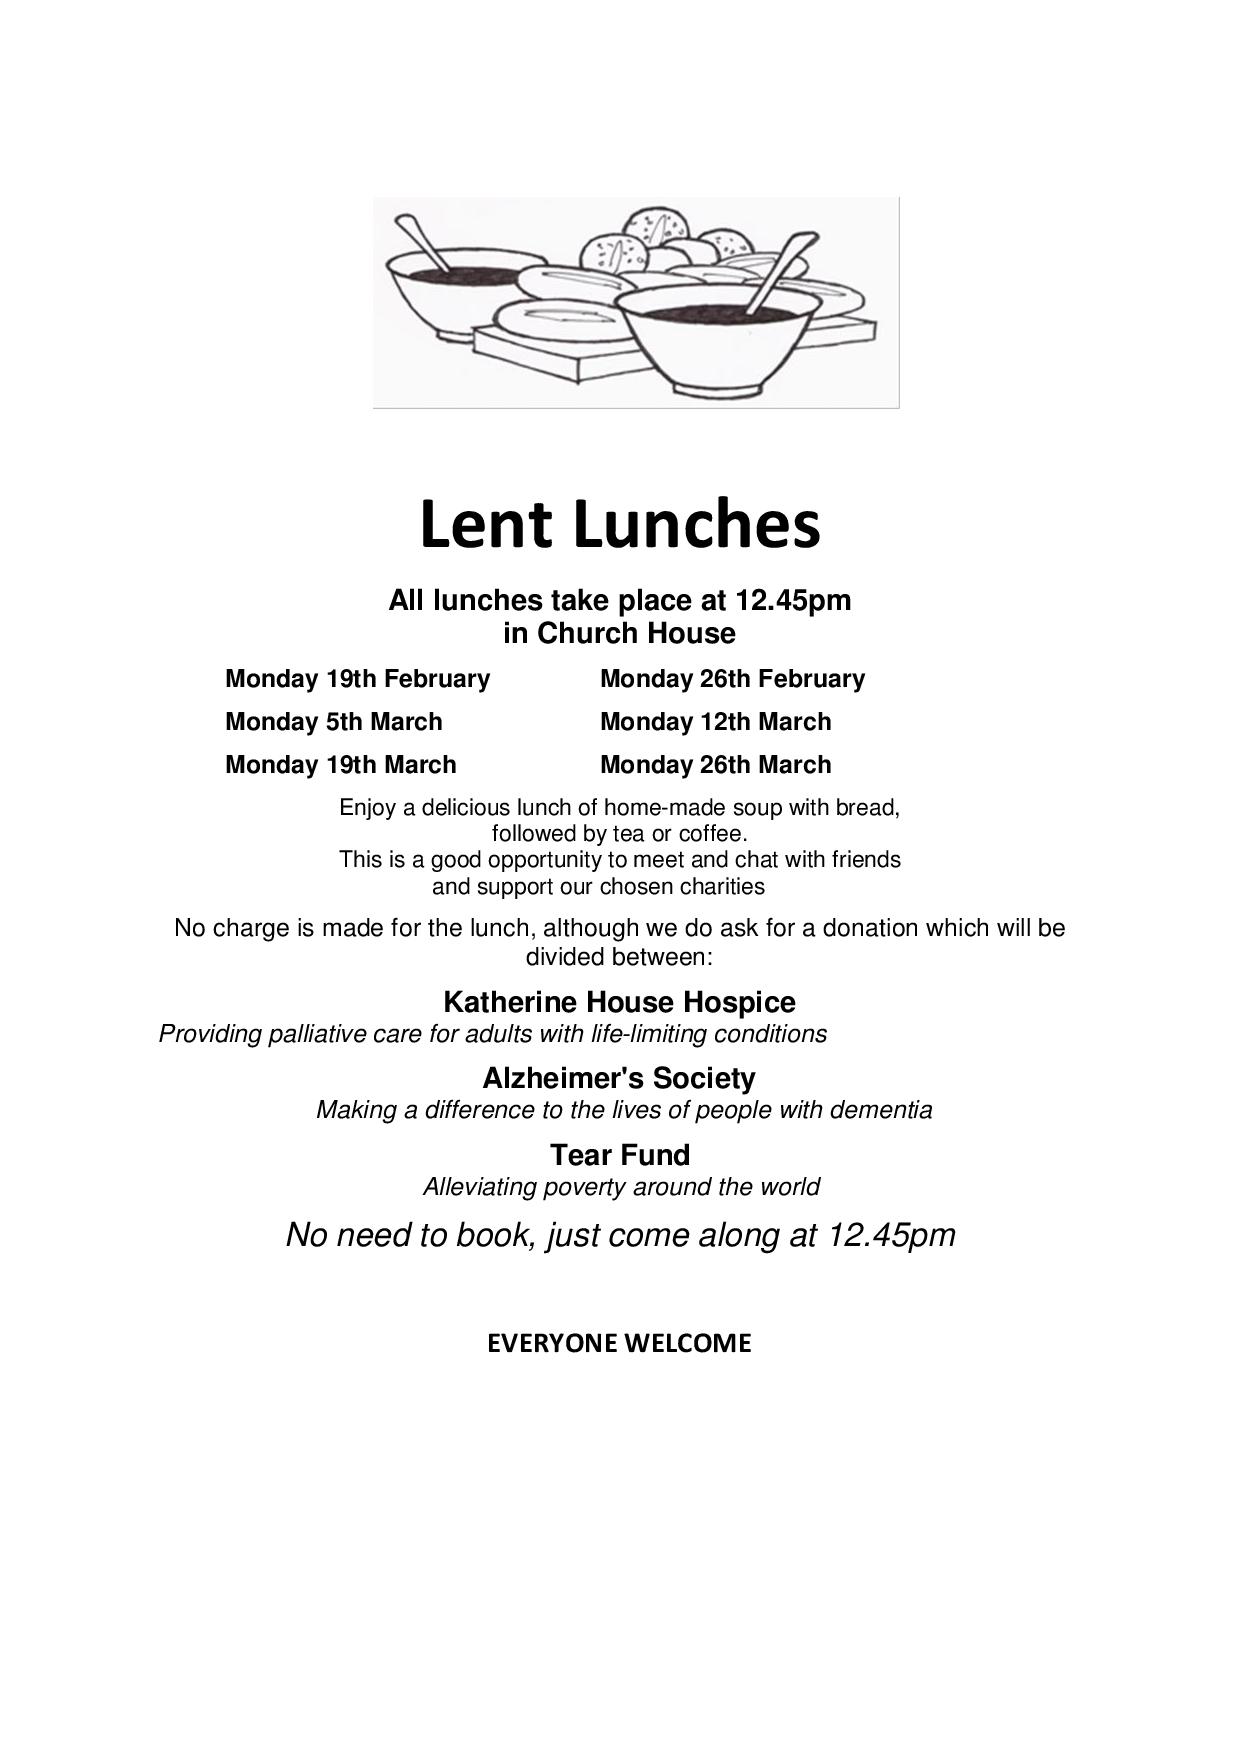 Lent lunches 2018-page-001